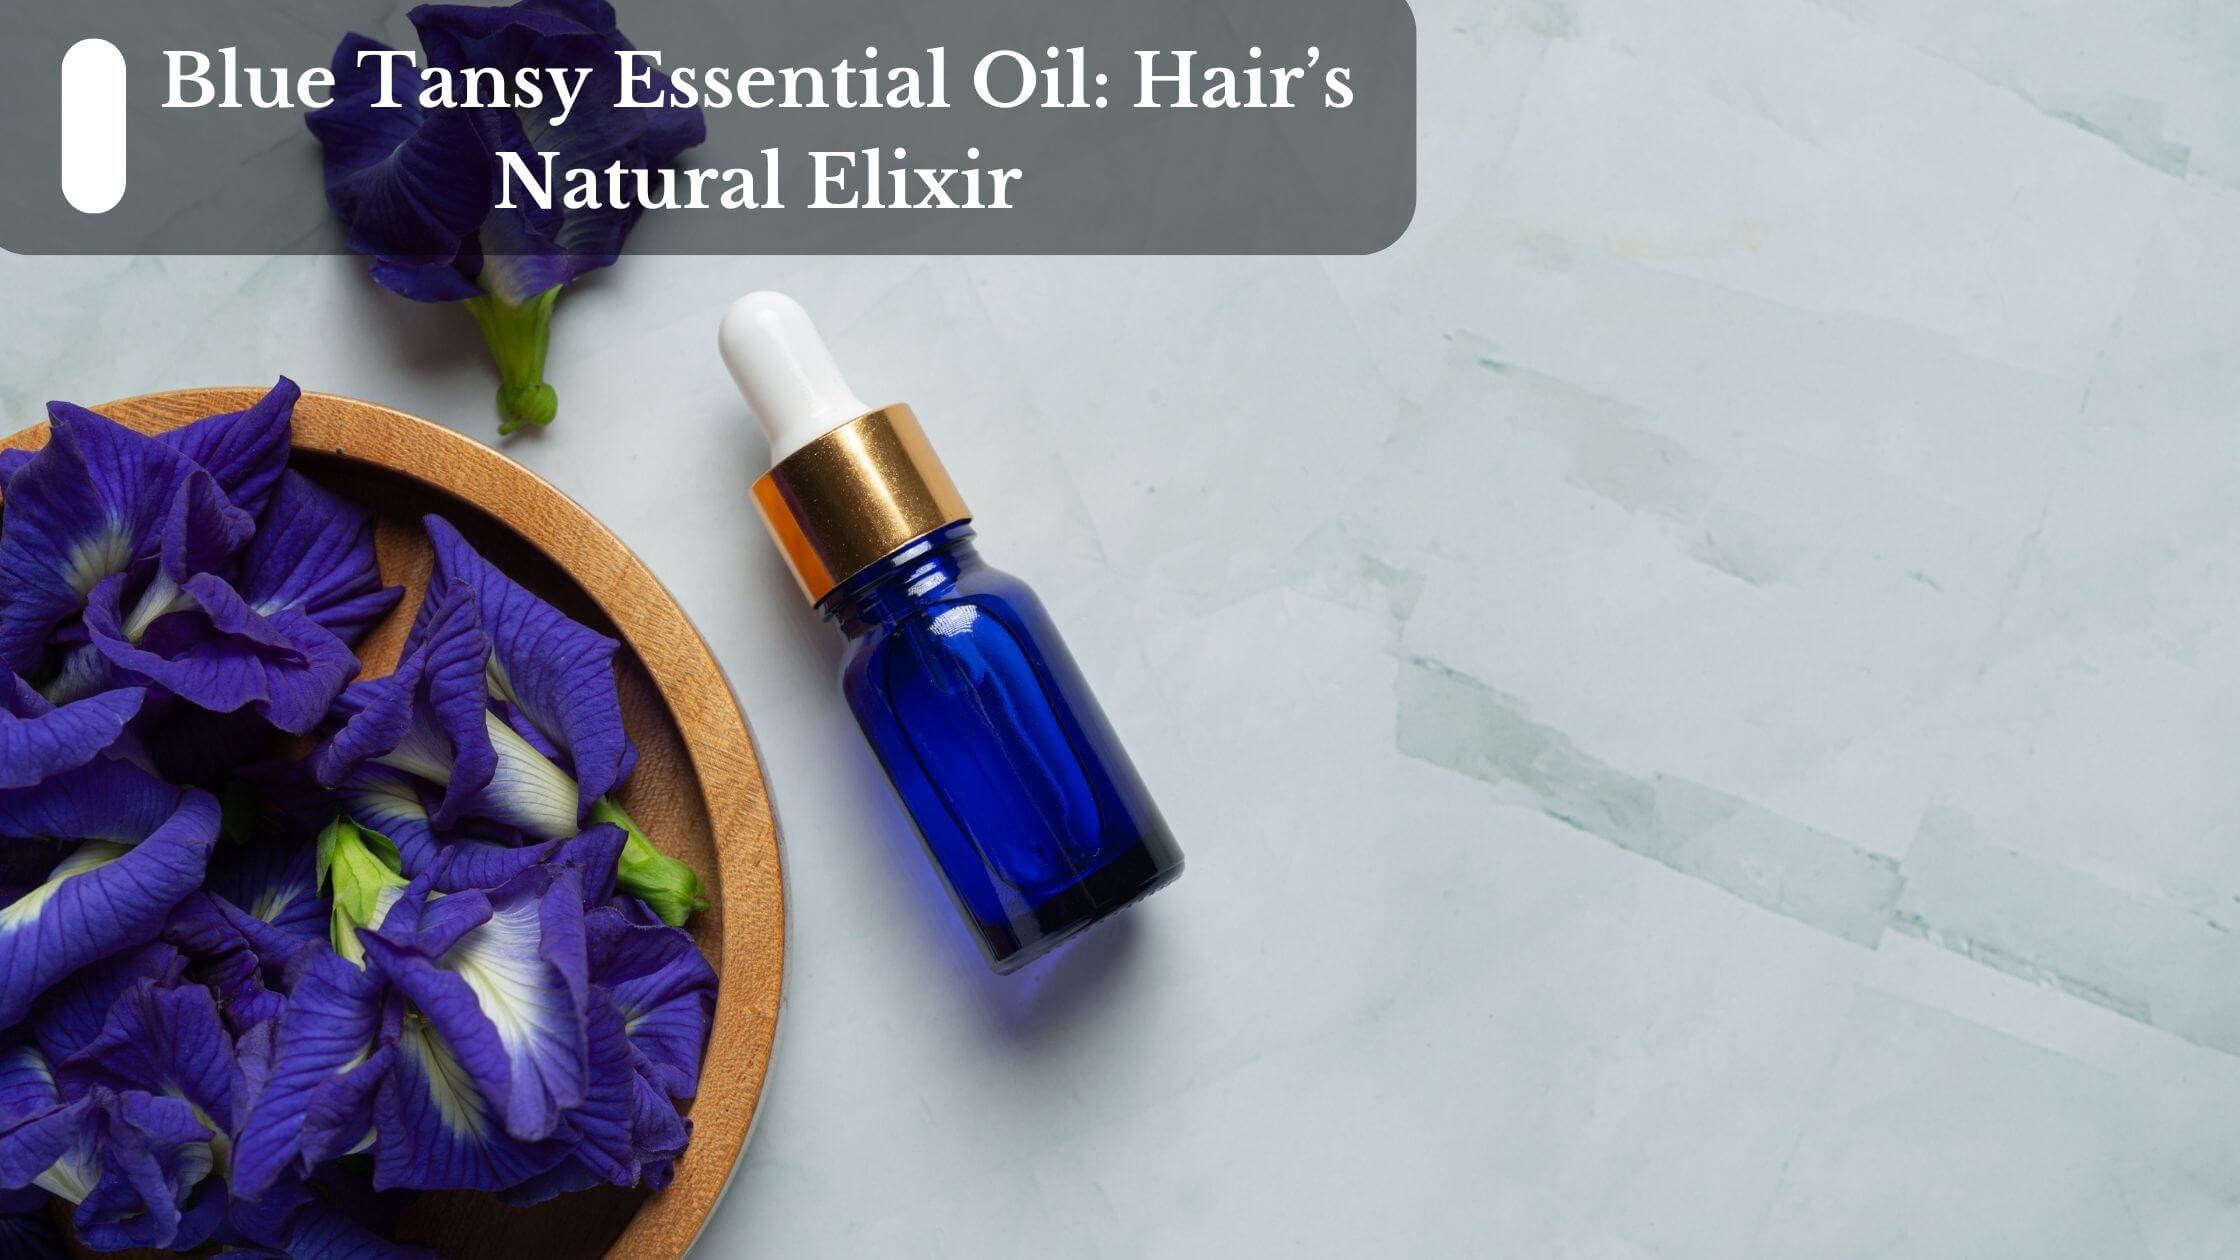 2. How to Use Blue Tansy Oil for Brassy Hair - wide 9